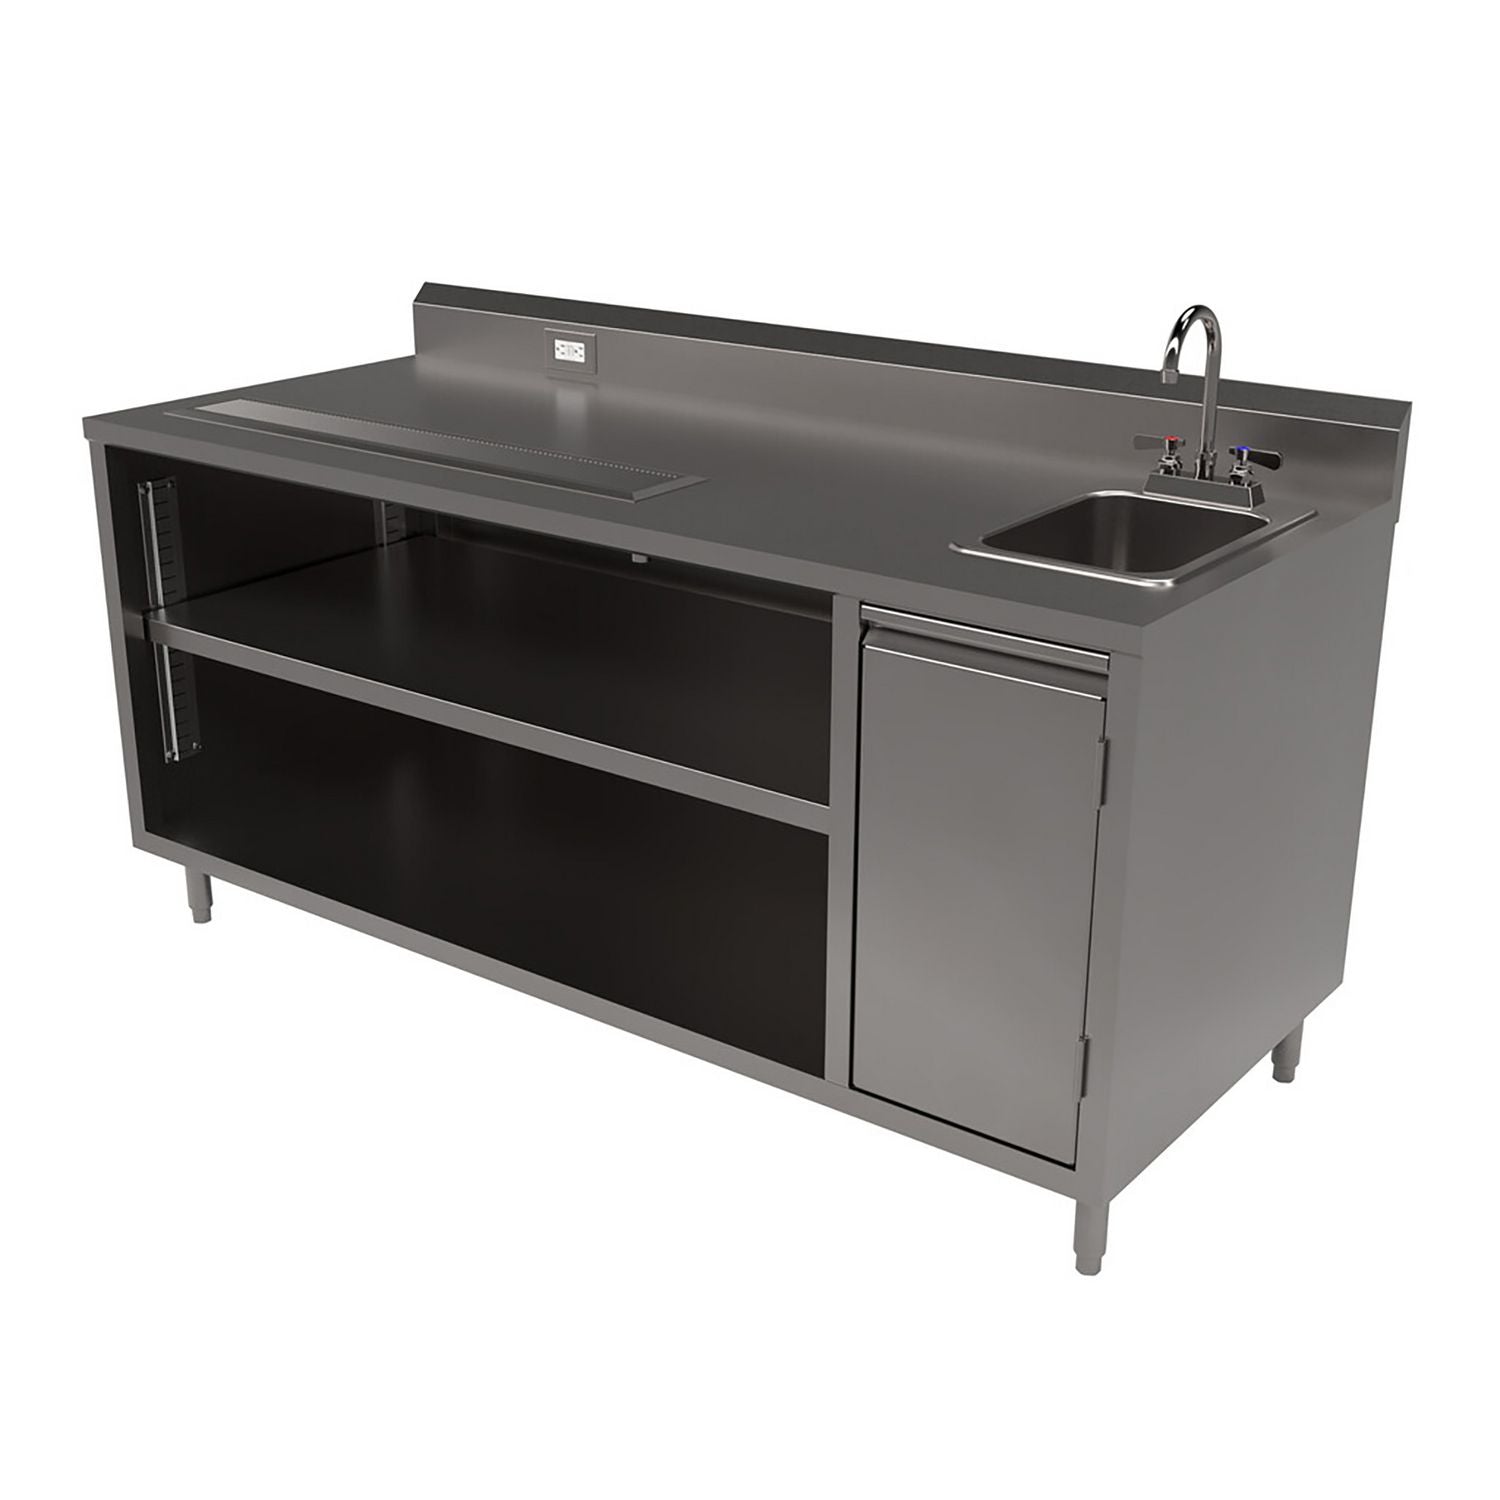 stainless-steel-beverage-table-with-right-sink-rectangular-30-x-72-x-415-silver-ships-in-4-6-business-days_bkebevt3072r - 4